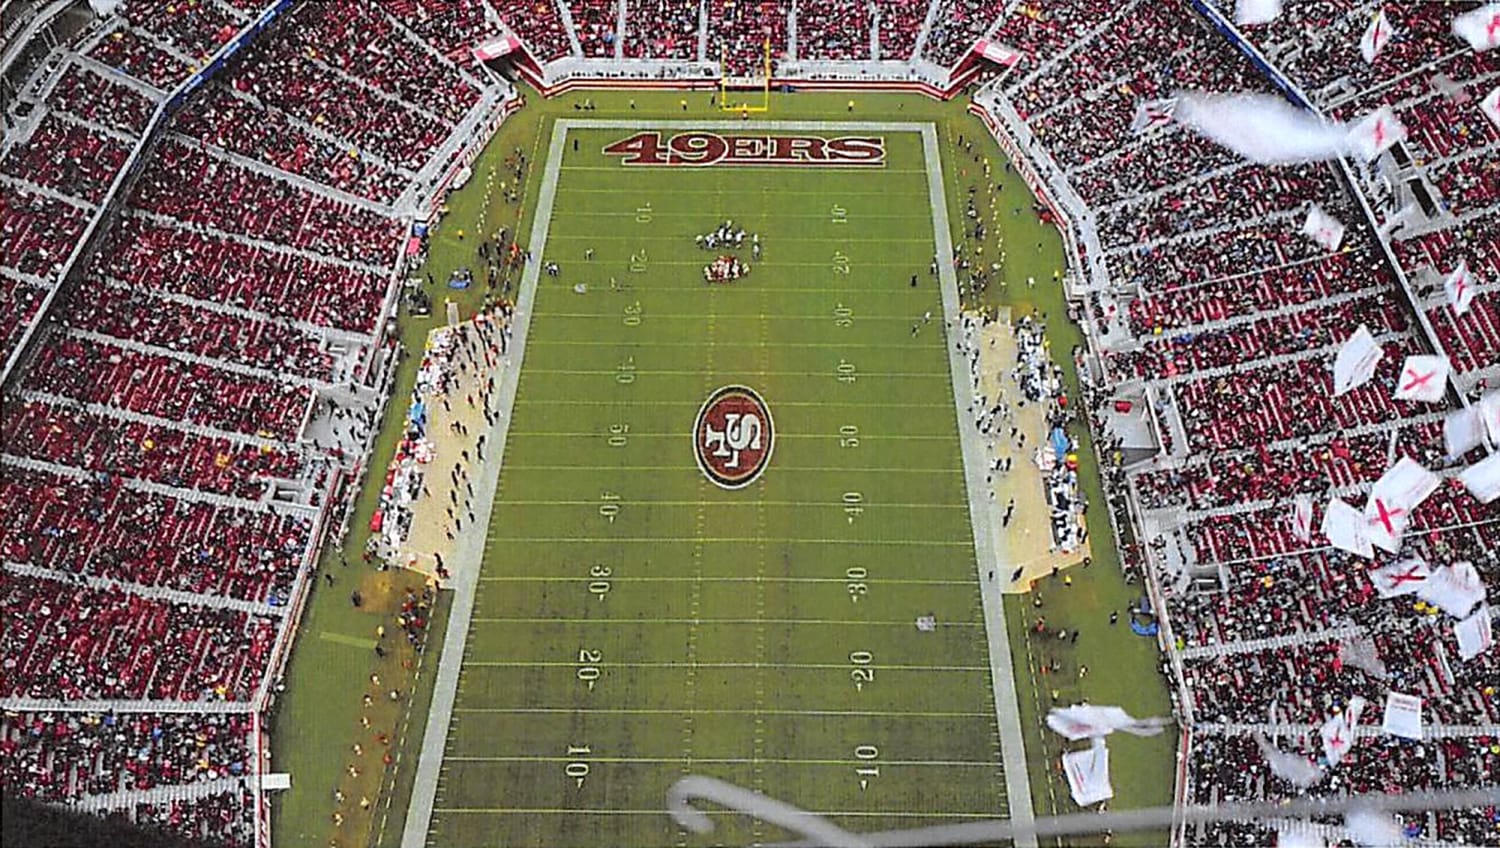 by adgang skrige Drone pilot charged with violating secure airspace over two NFL games